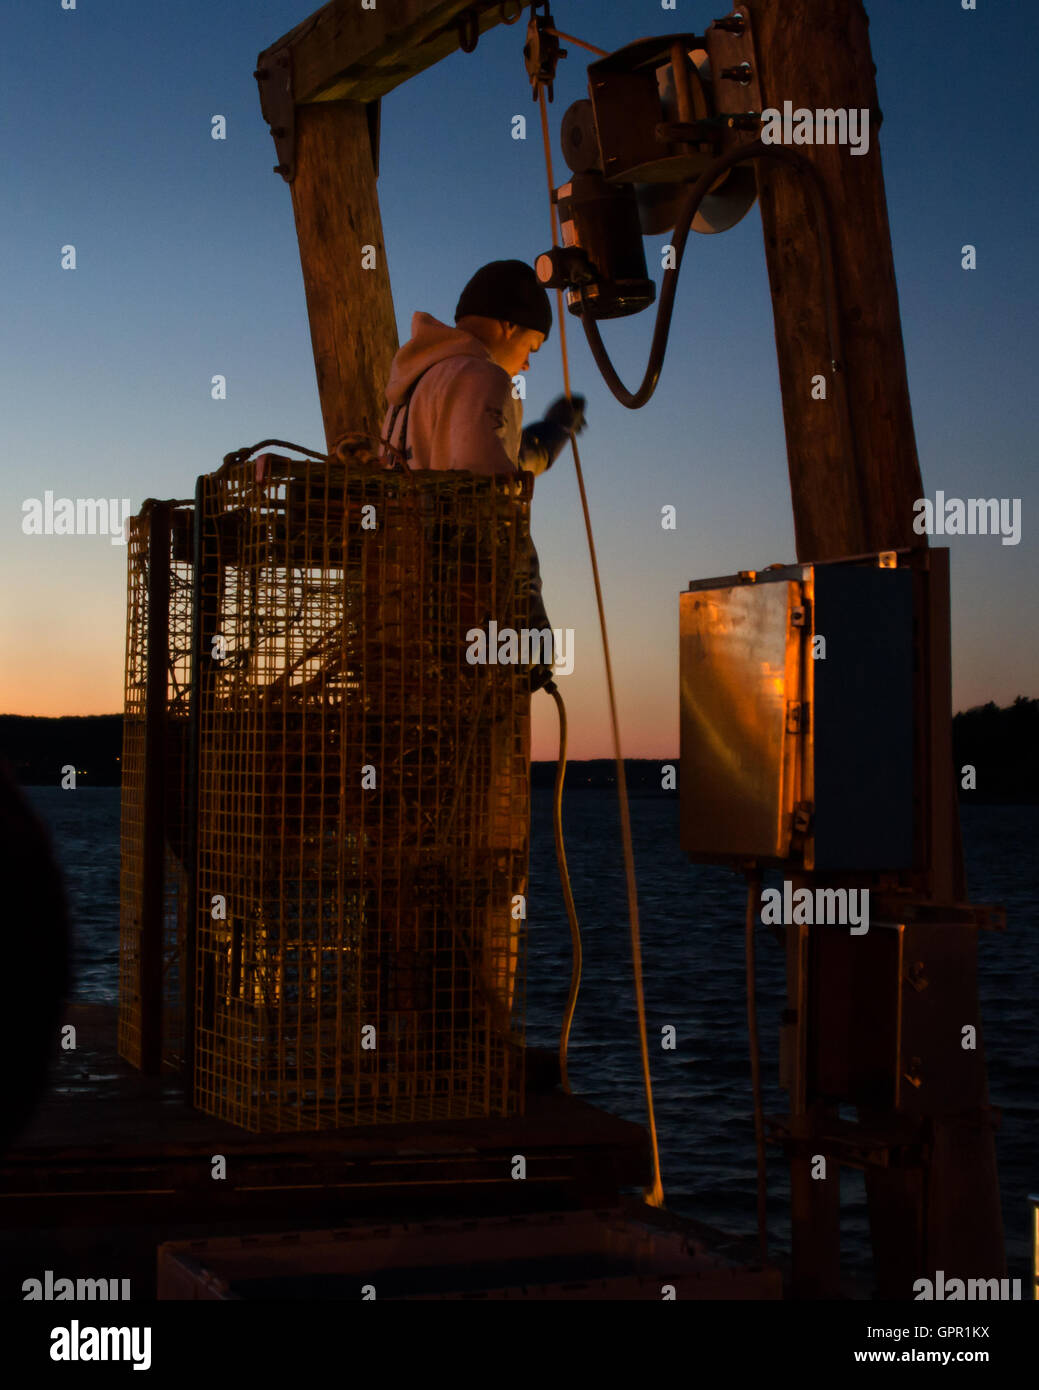 A fisherman unloads his boat at the Town Dock on a December evening in Bar Harbor, Maine. Stock Photo